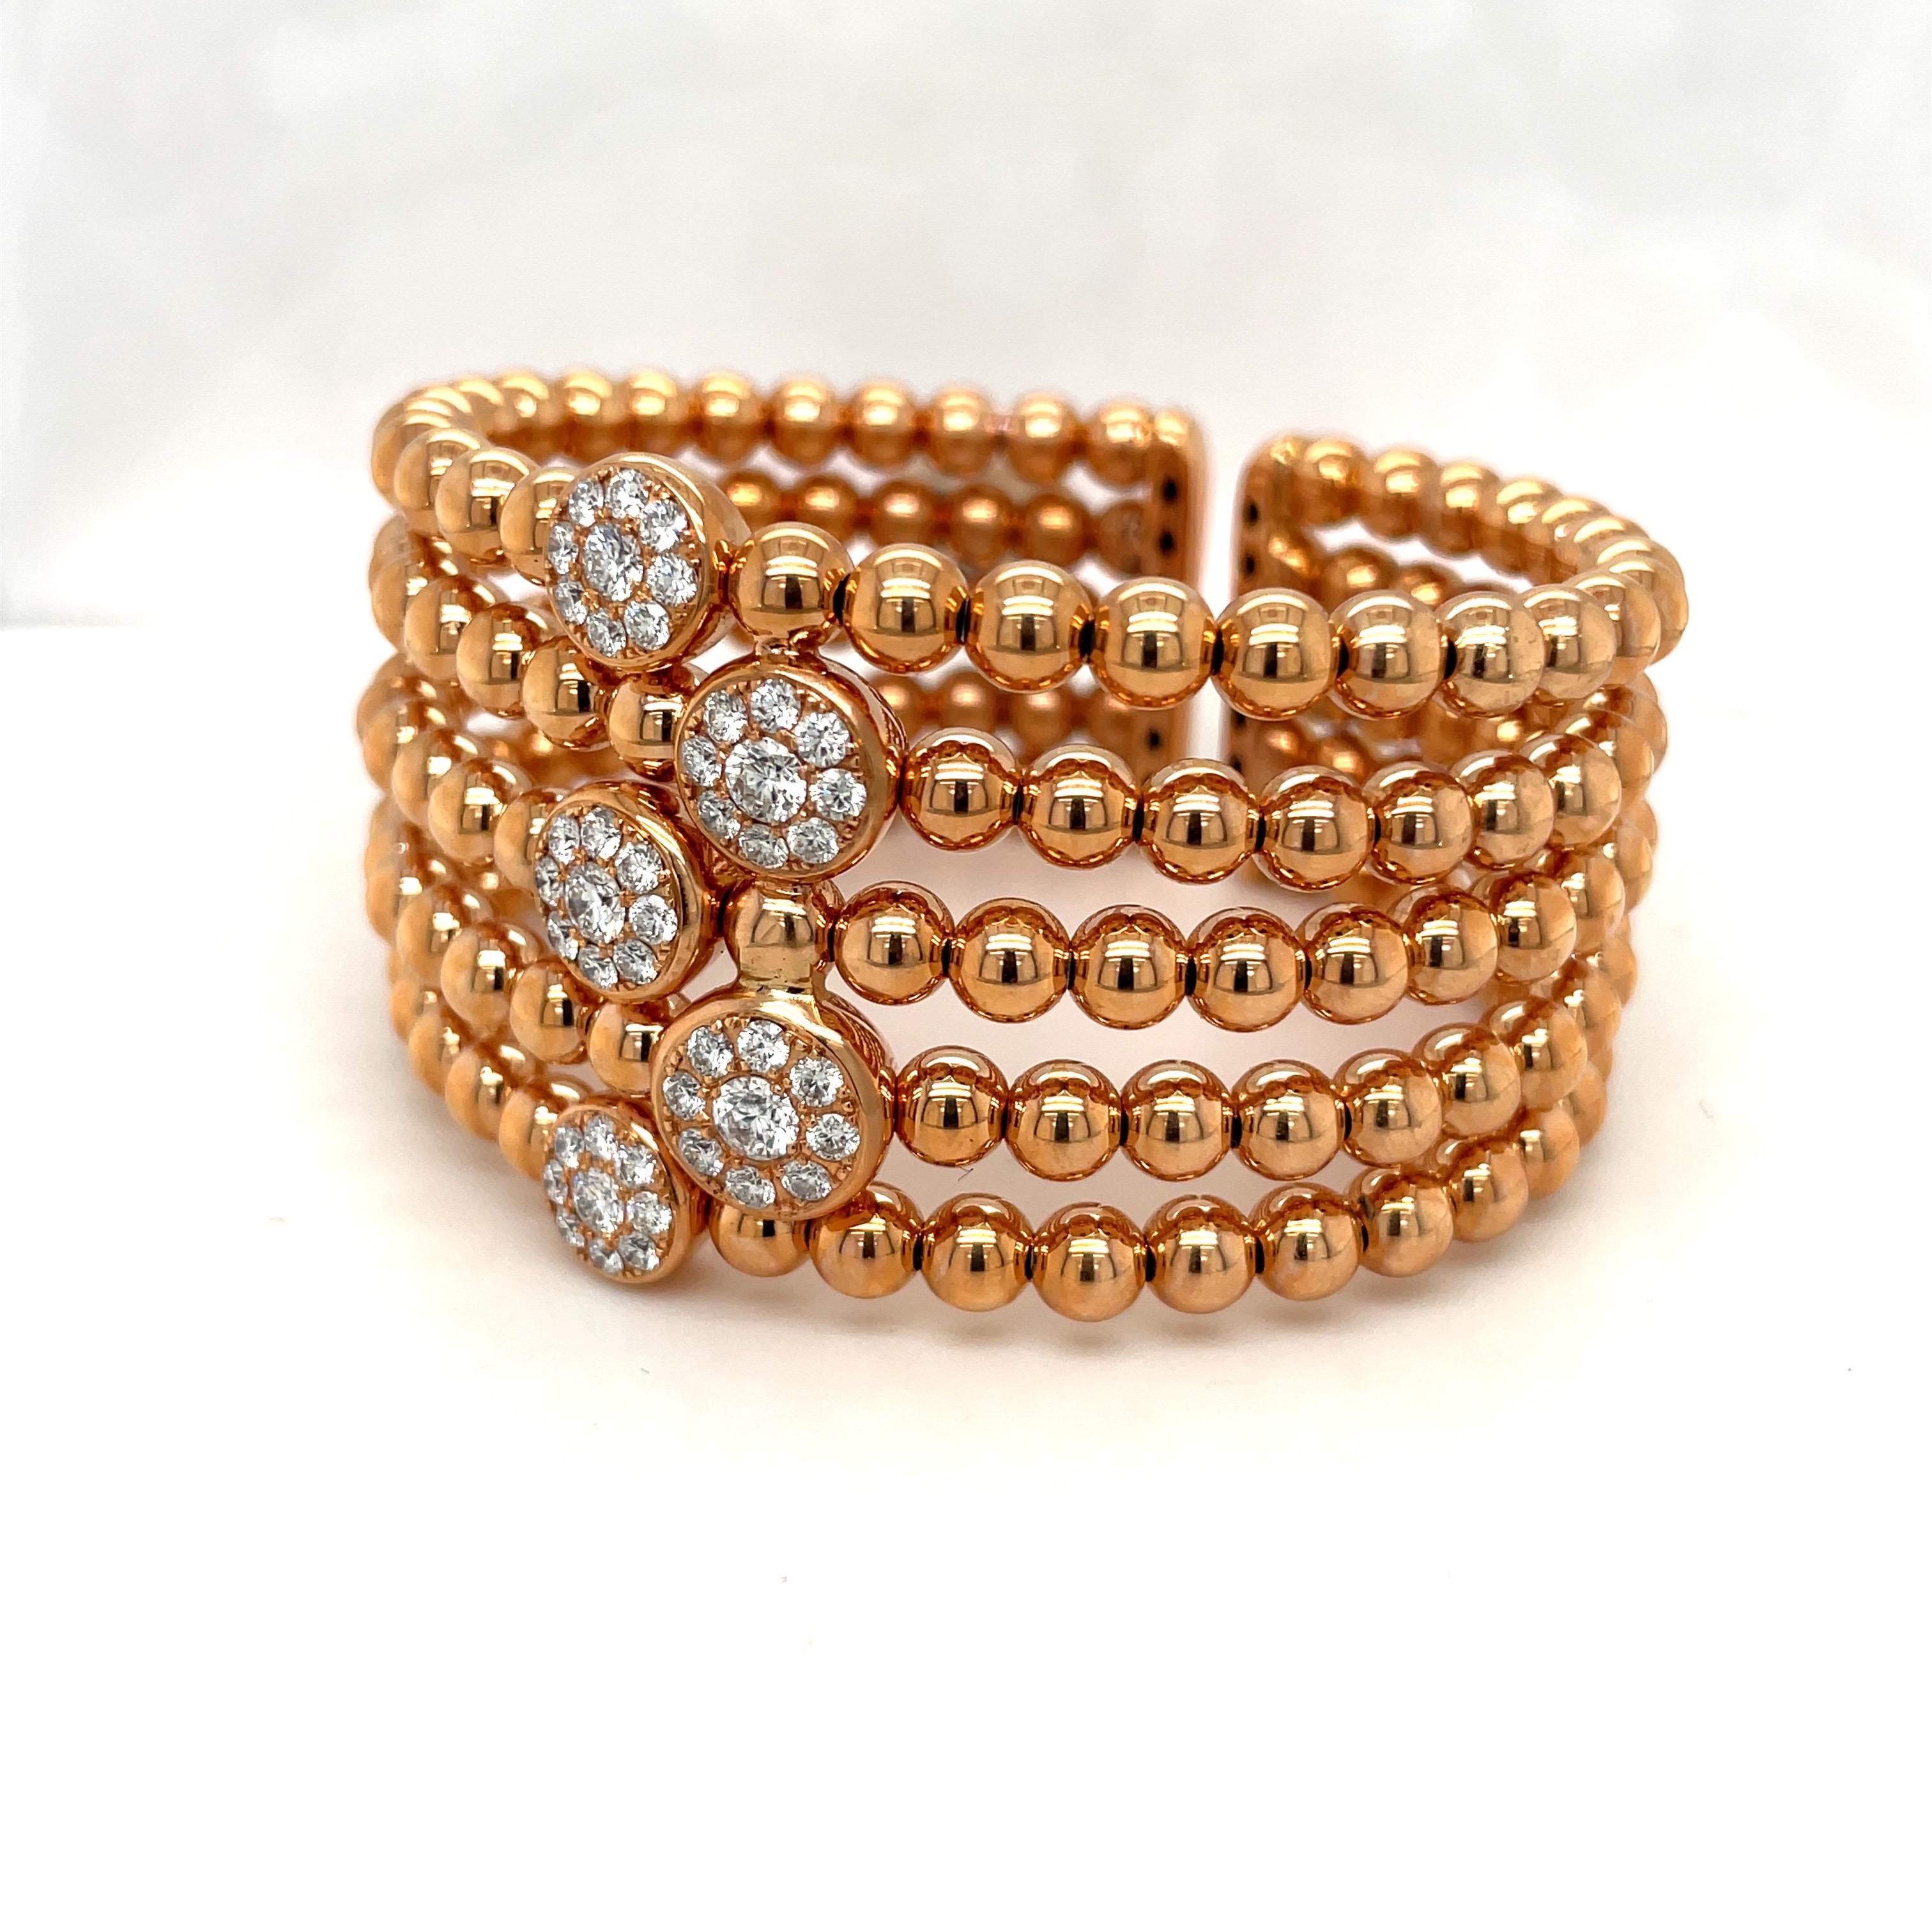 This comfortable and flexible open-spring cuff is composed of five rows of 18-karat rose gold beads, and features a center row with 5 pavé diamond discs. Round brilliant diamonds: 2.19 total carats.
Gorgeous and super versatile bracelet - Can be